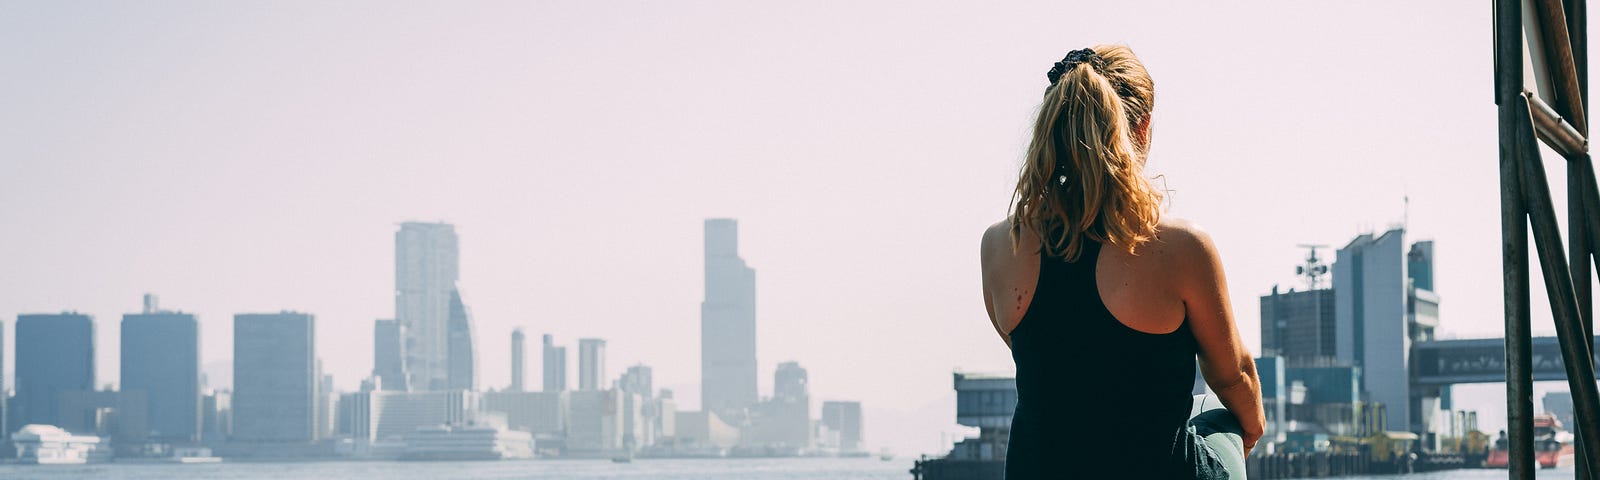 A blonde woman exercises while she looks out at the ocean. A city skyline is off in the distance